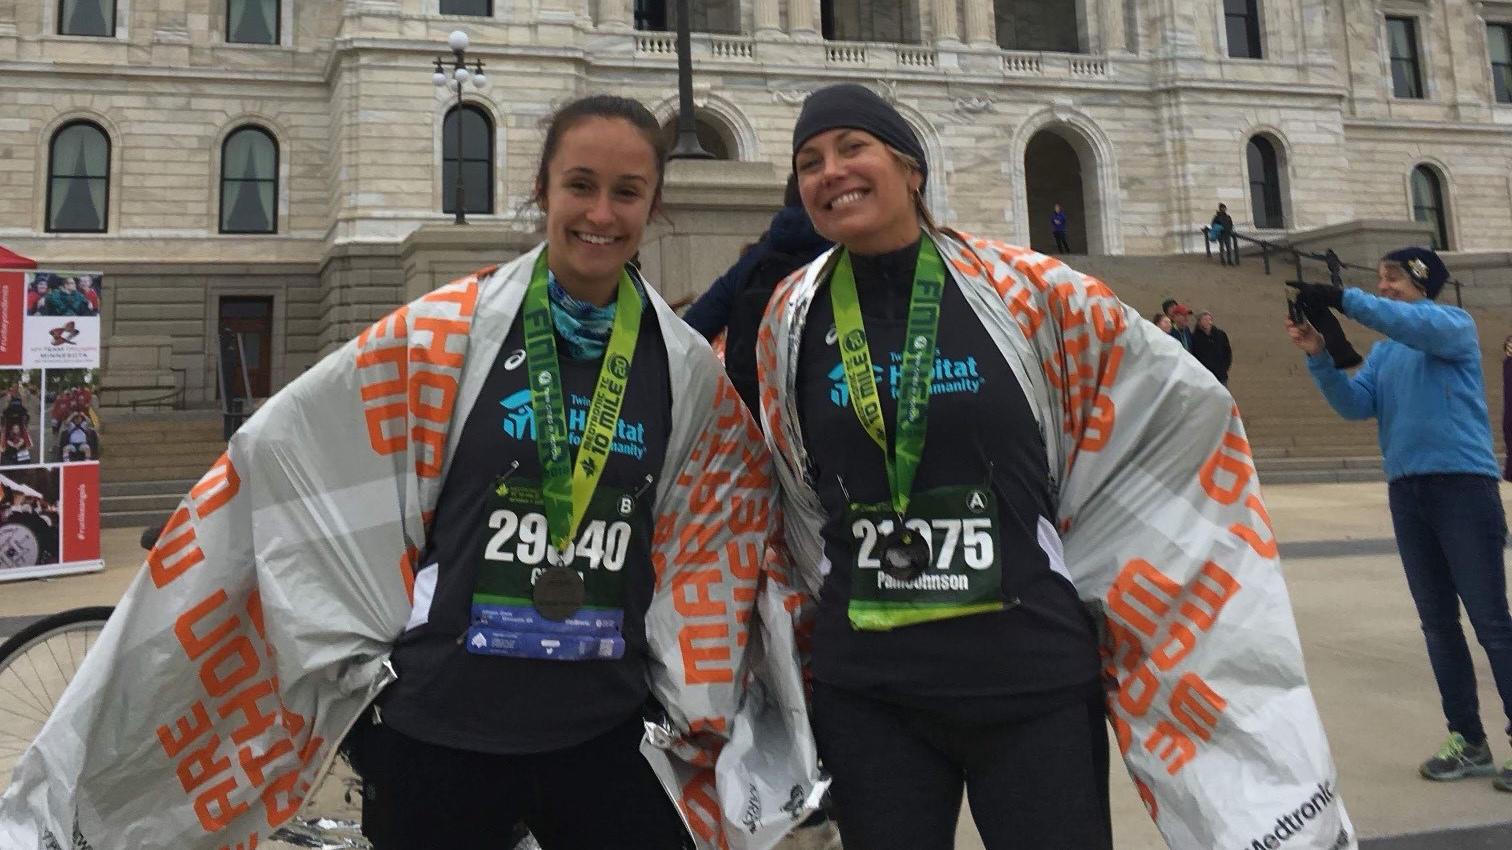 Pam Johnson and her niece Gracia stand with medals they received from running in the 2019 Twin Cities Marathon